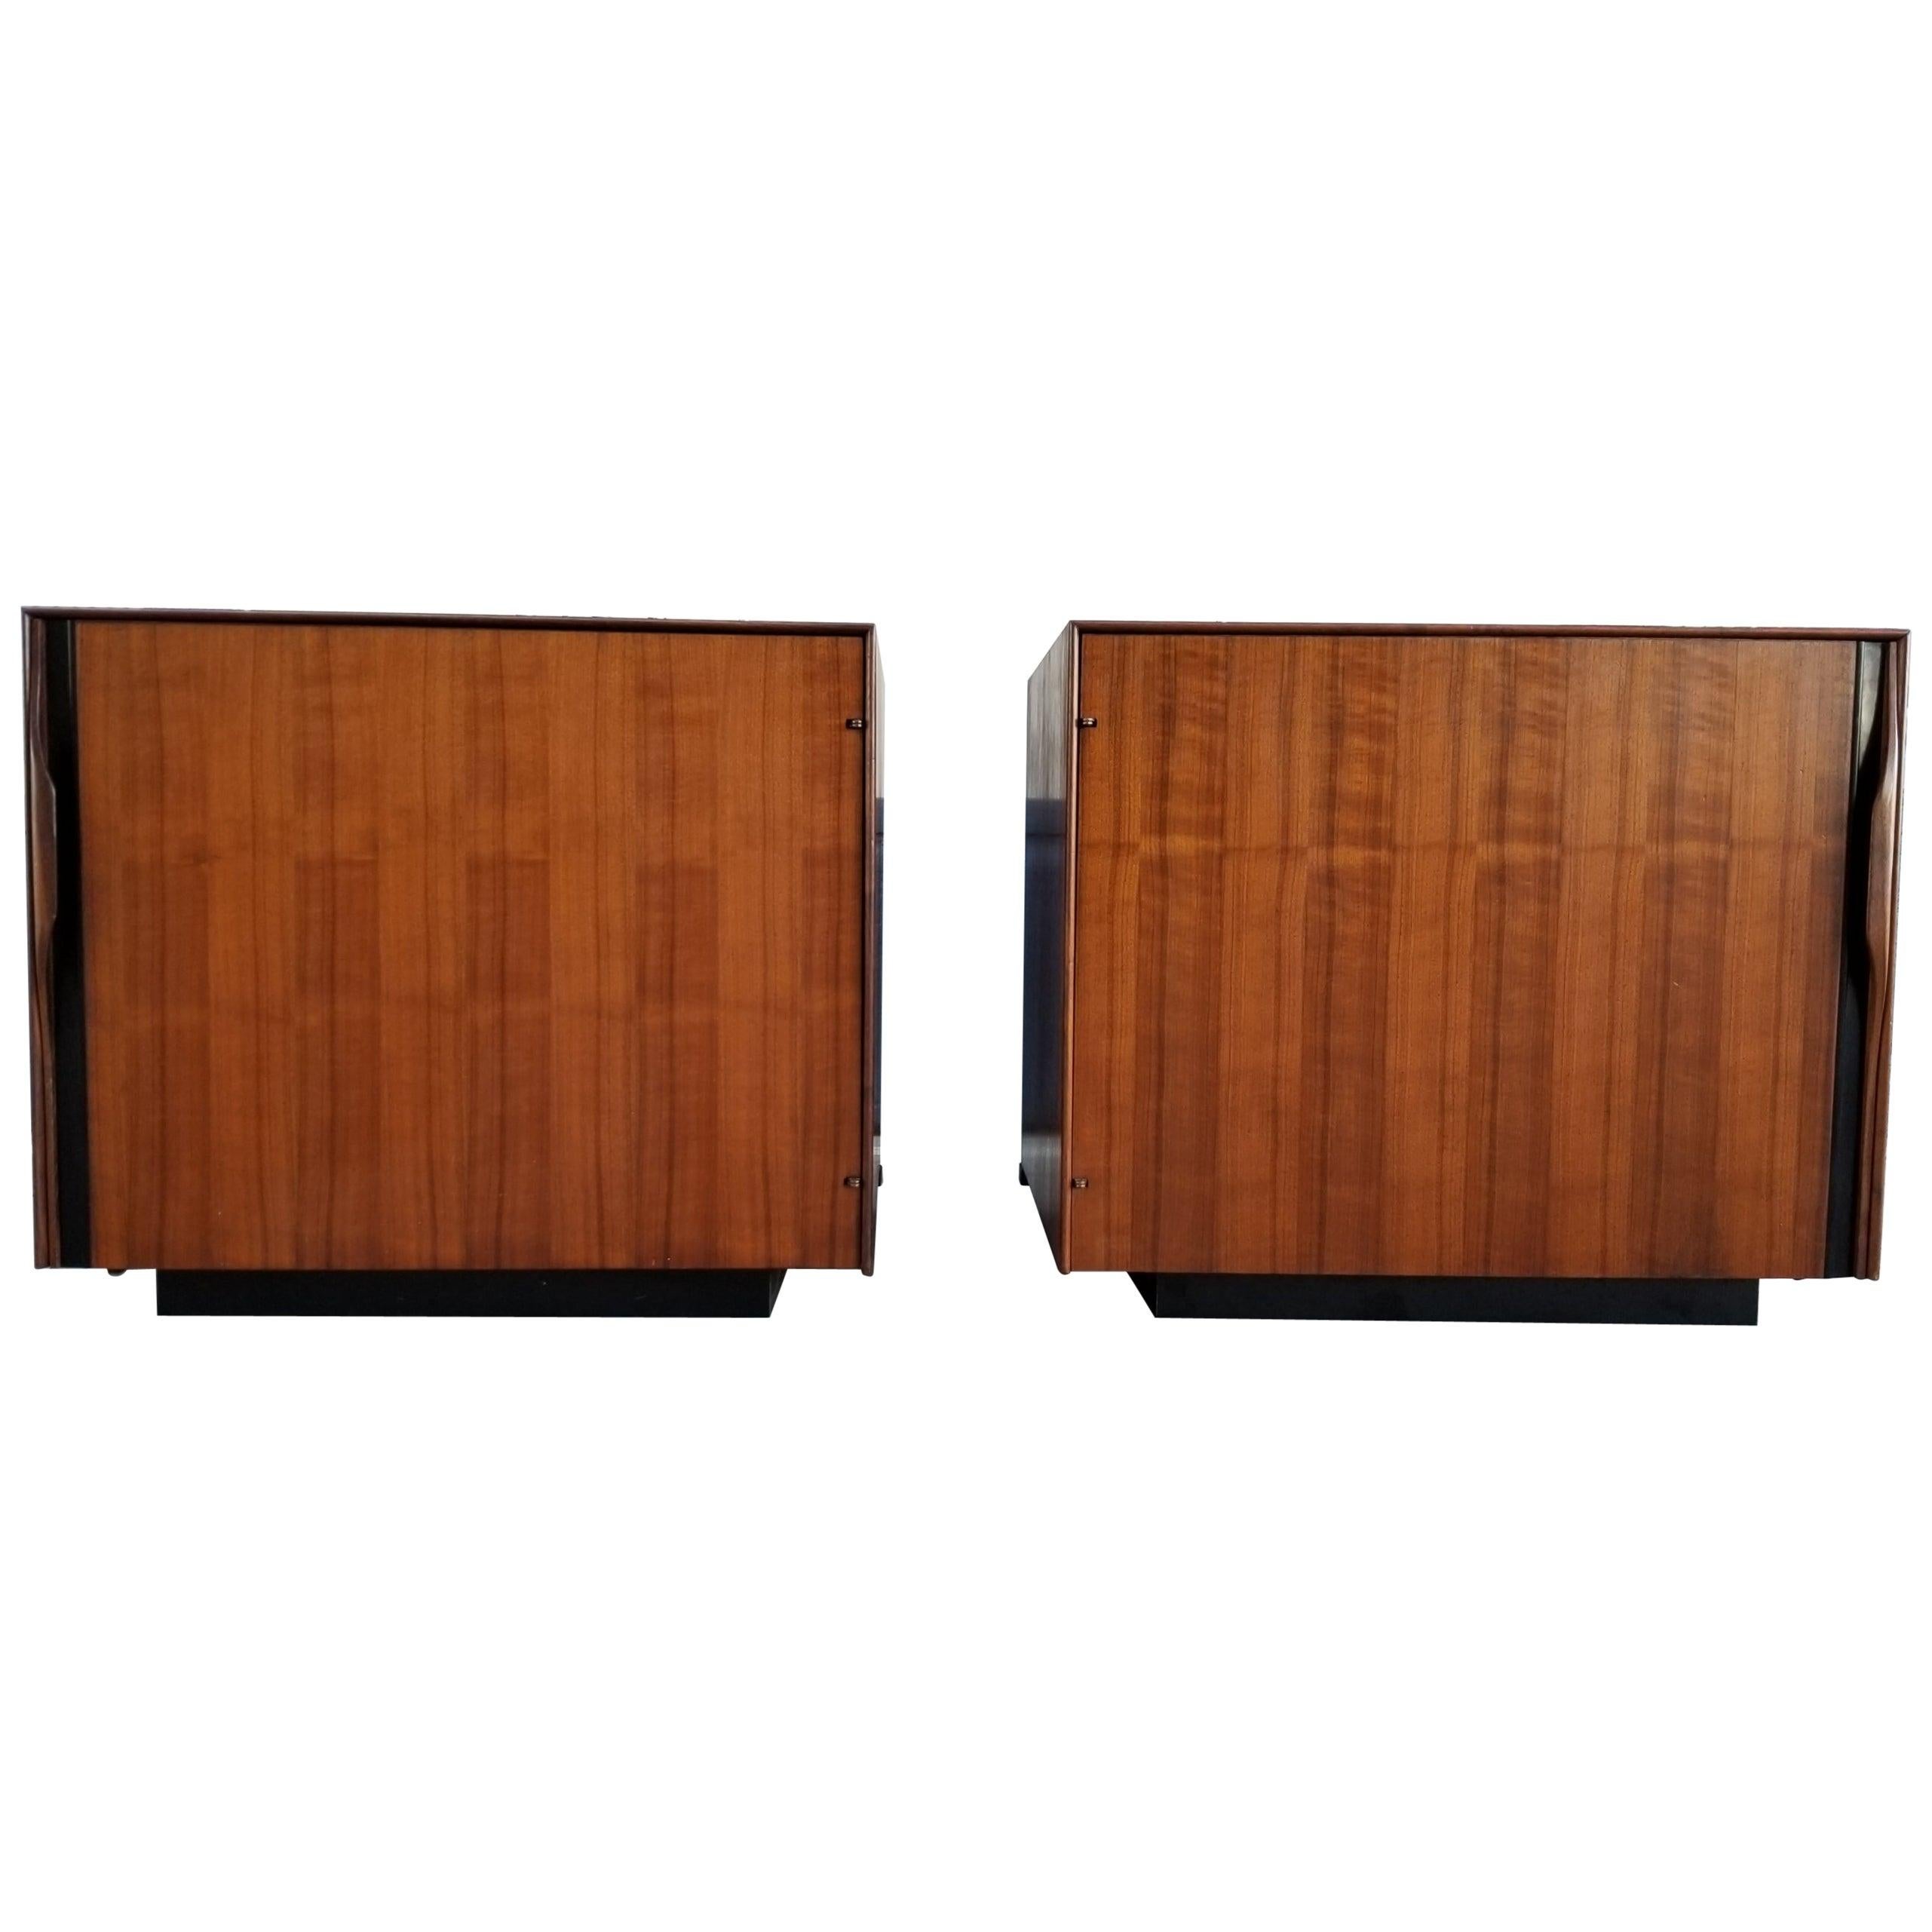 John Kapel Side Tables or Cabinets, a Pair